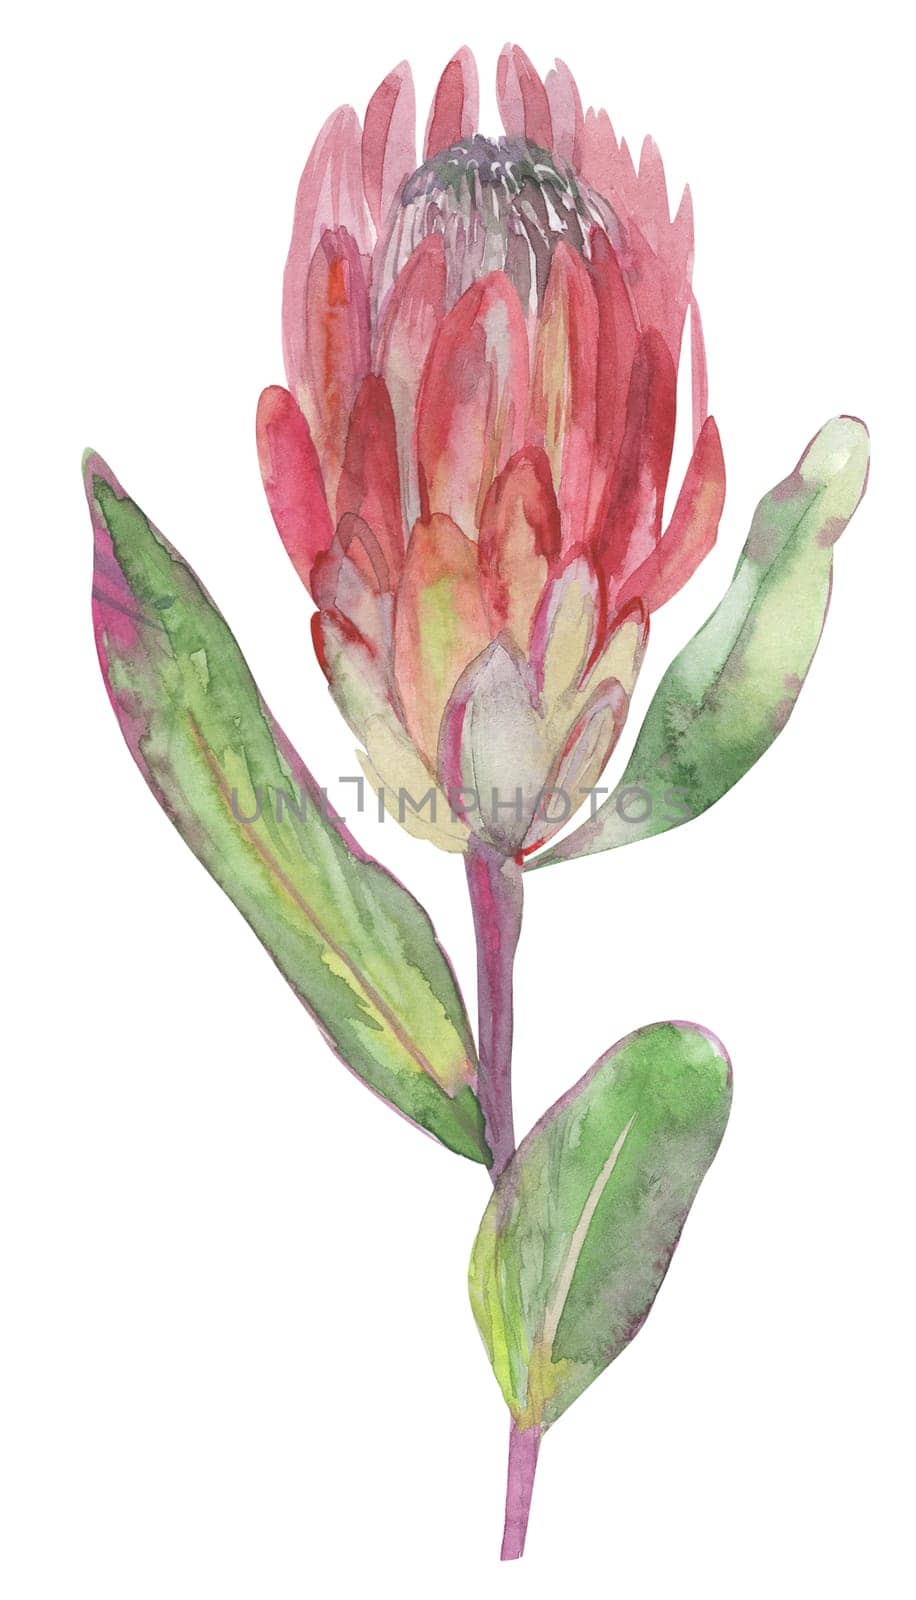 watercolor dried flower of pink protea flower isolated on white background